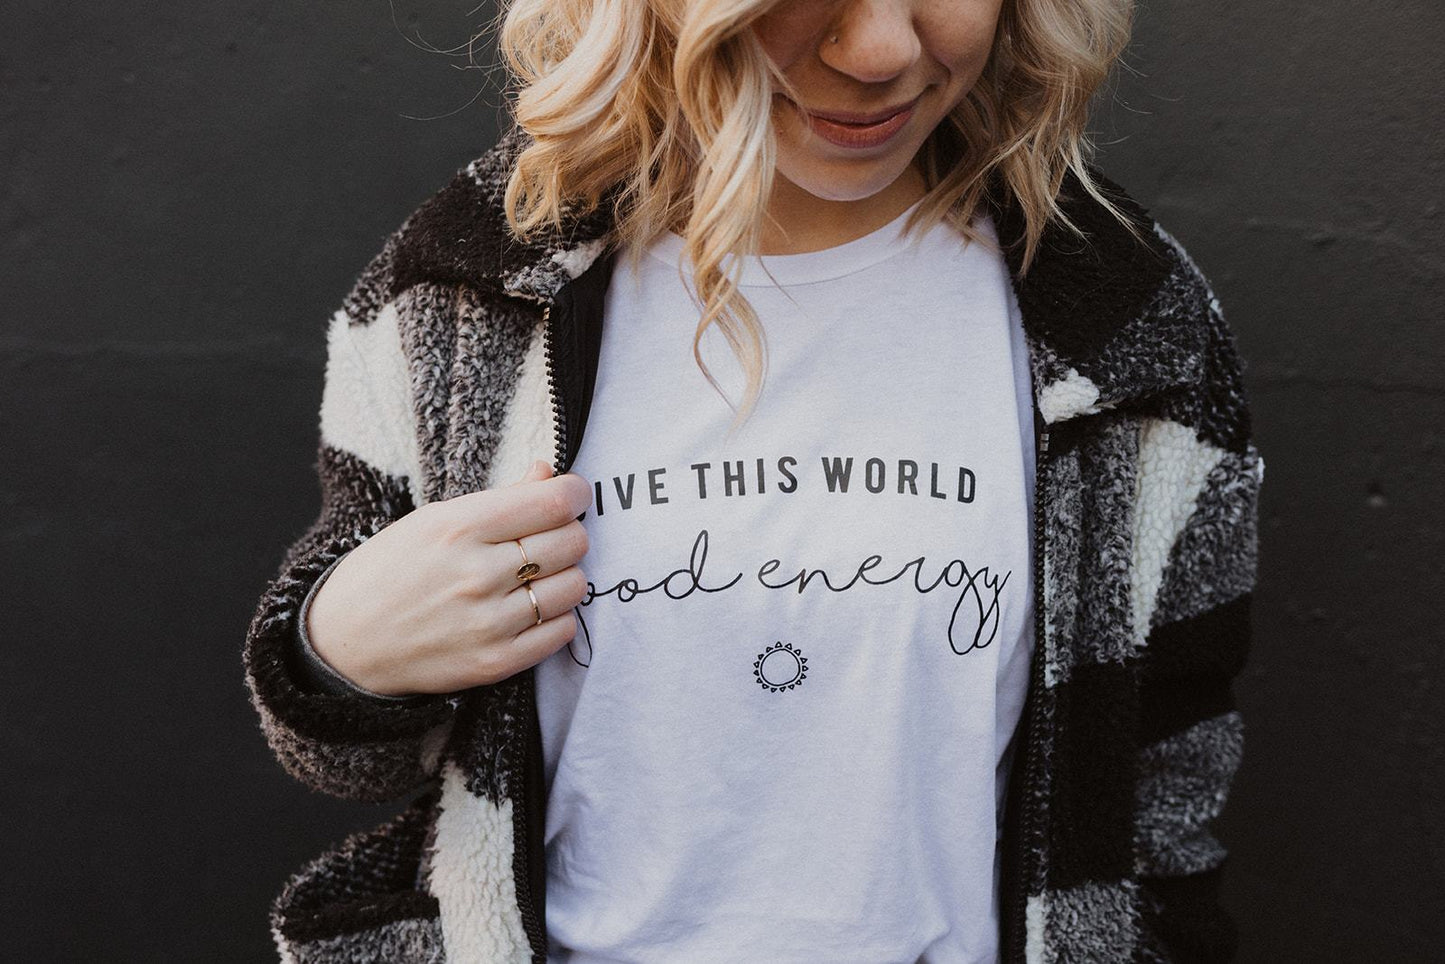 Give This World Good Energy - Muscle Tank